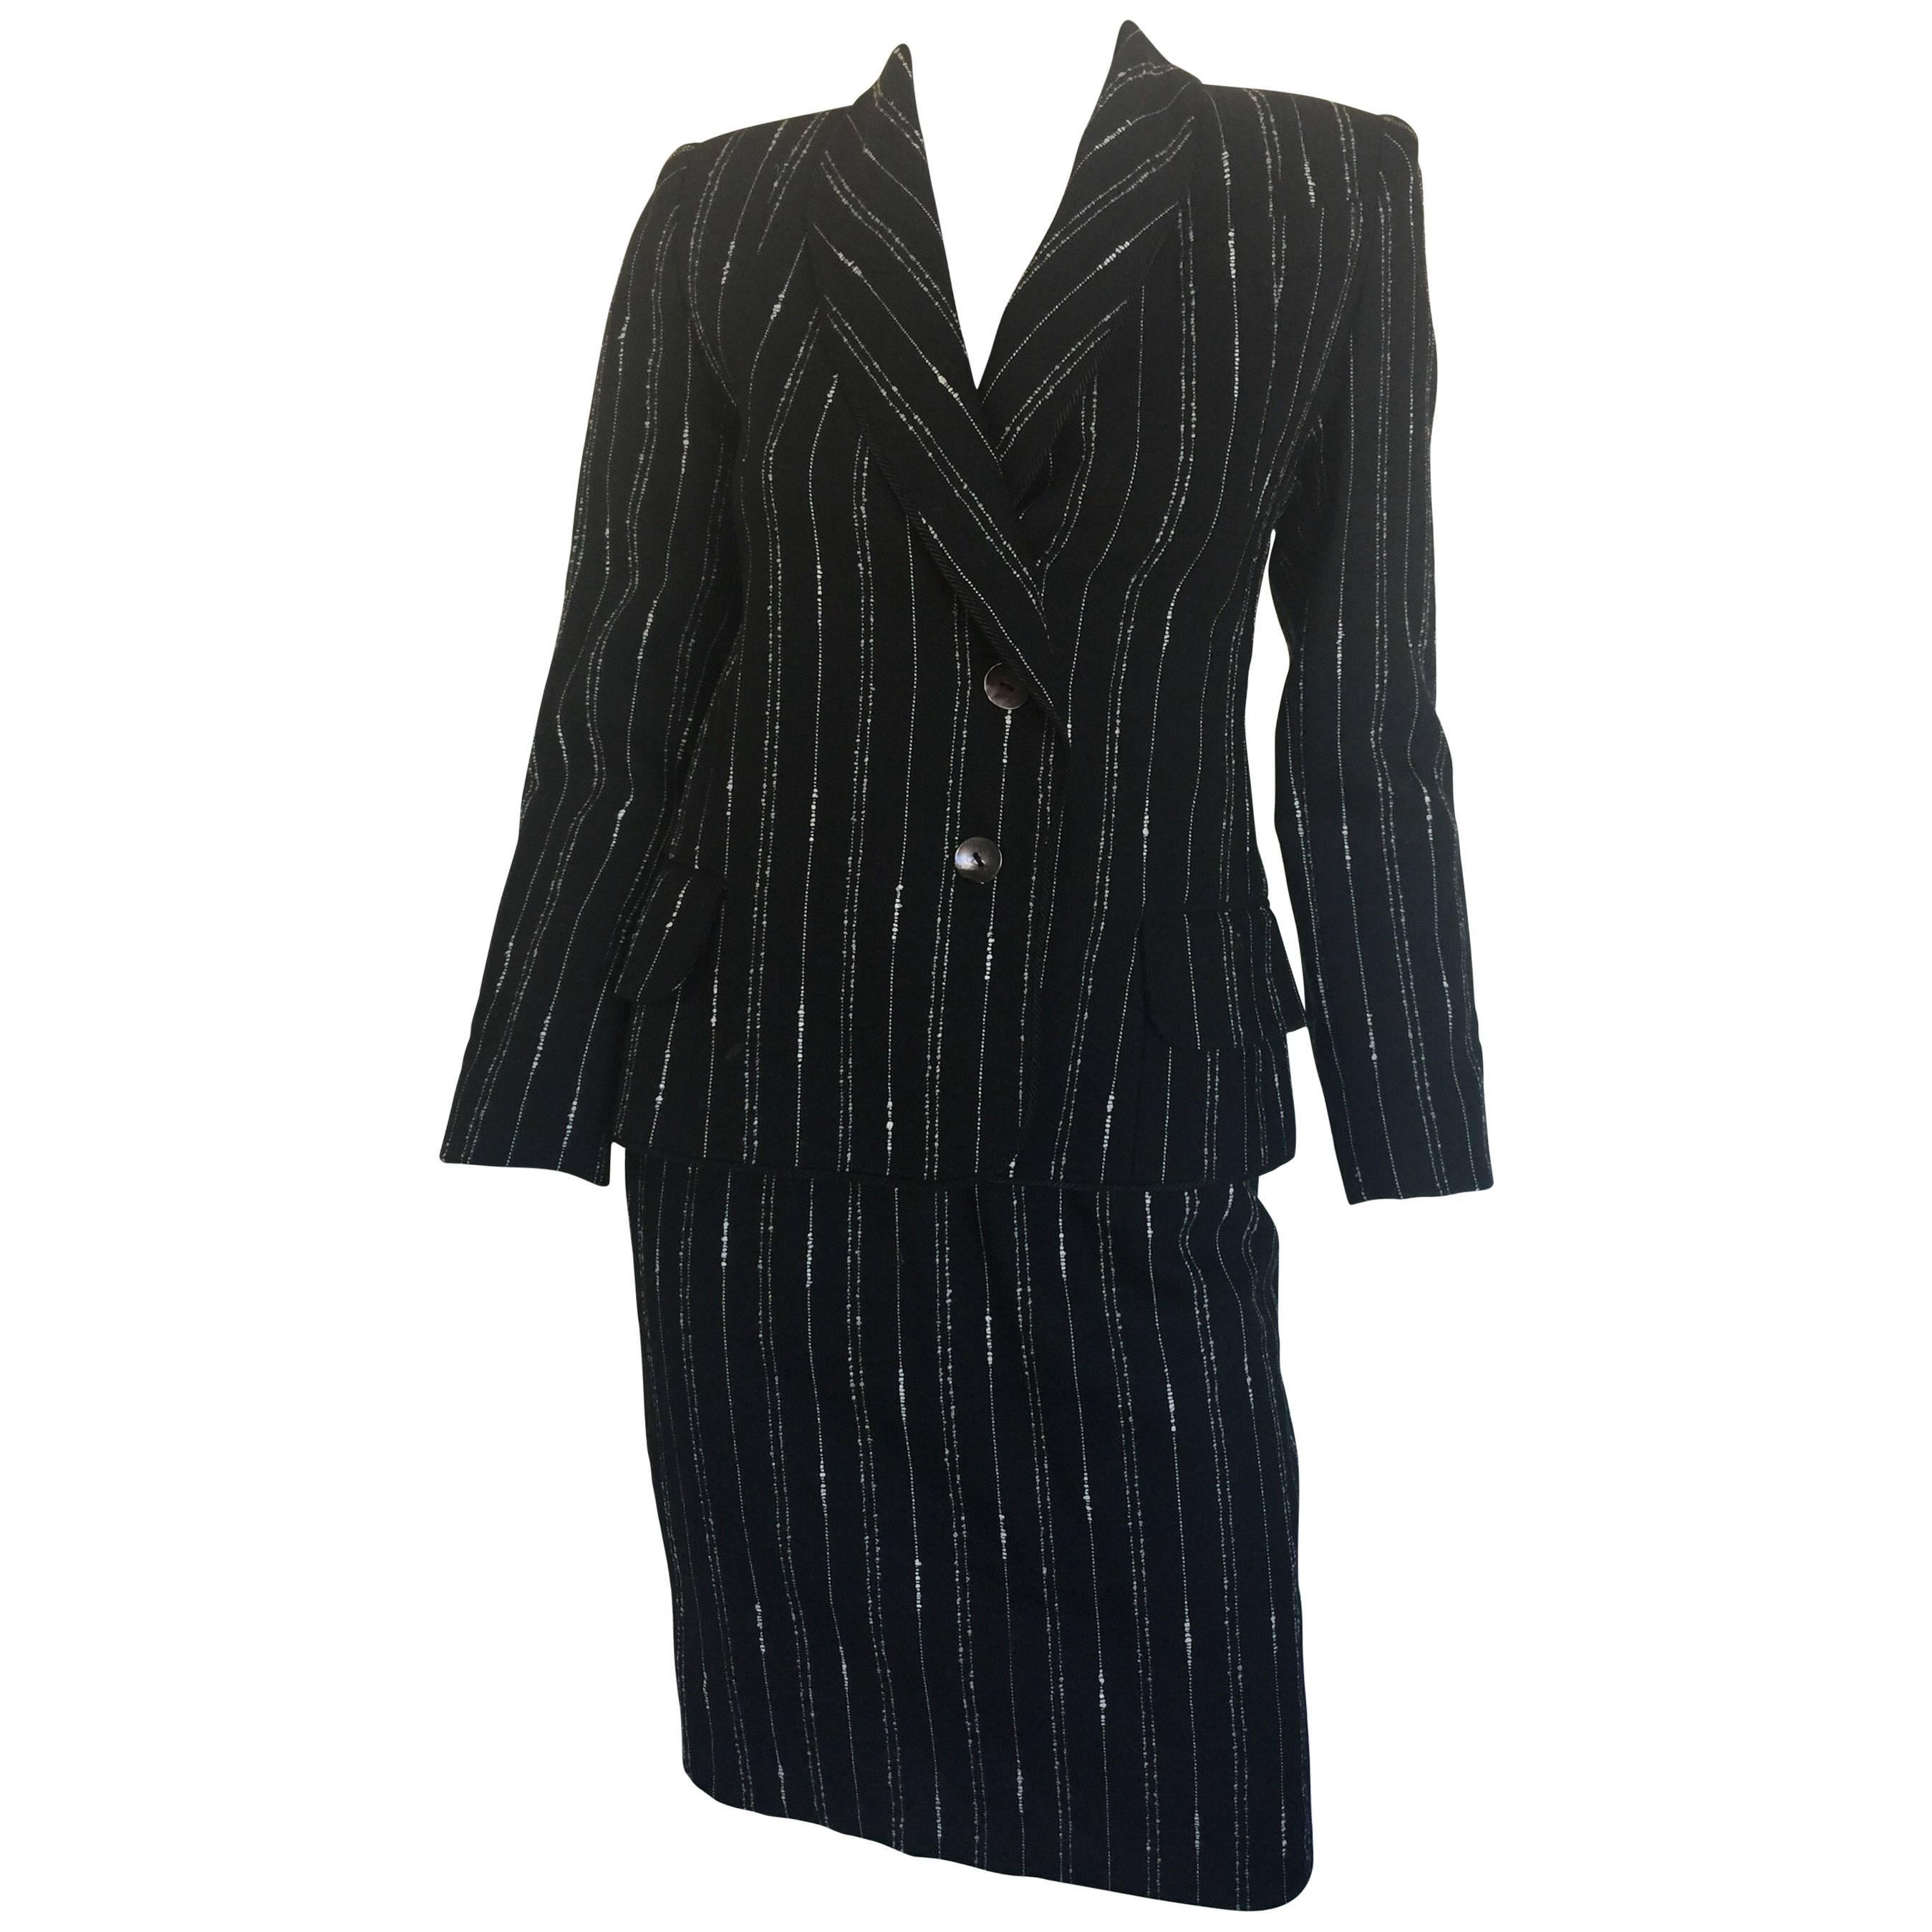 Givenchy black and white pinstripe skirt suit For Sale